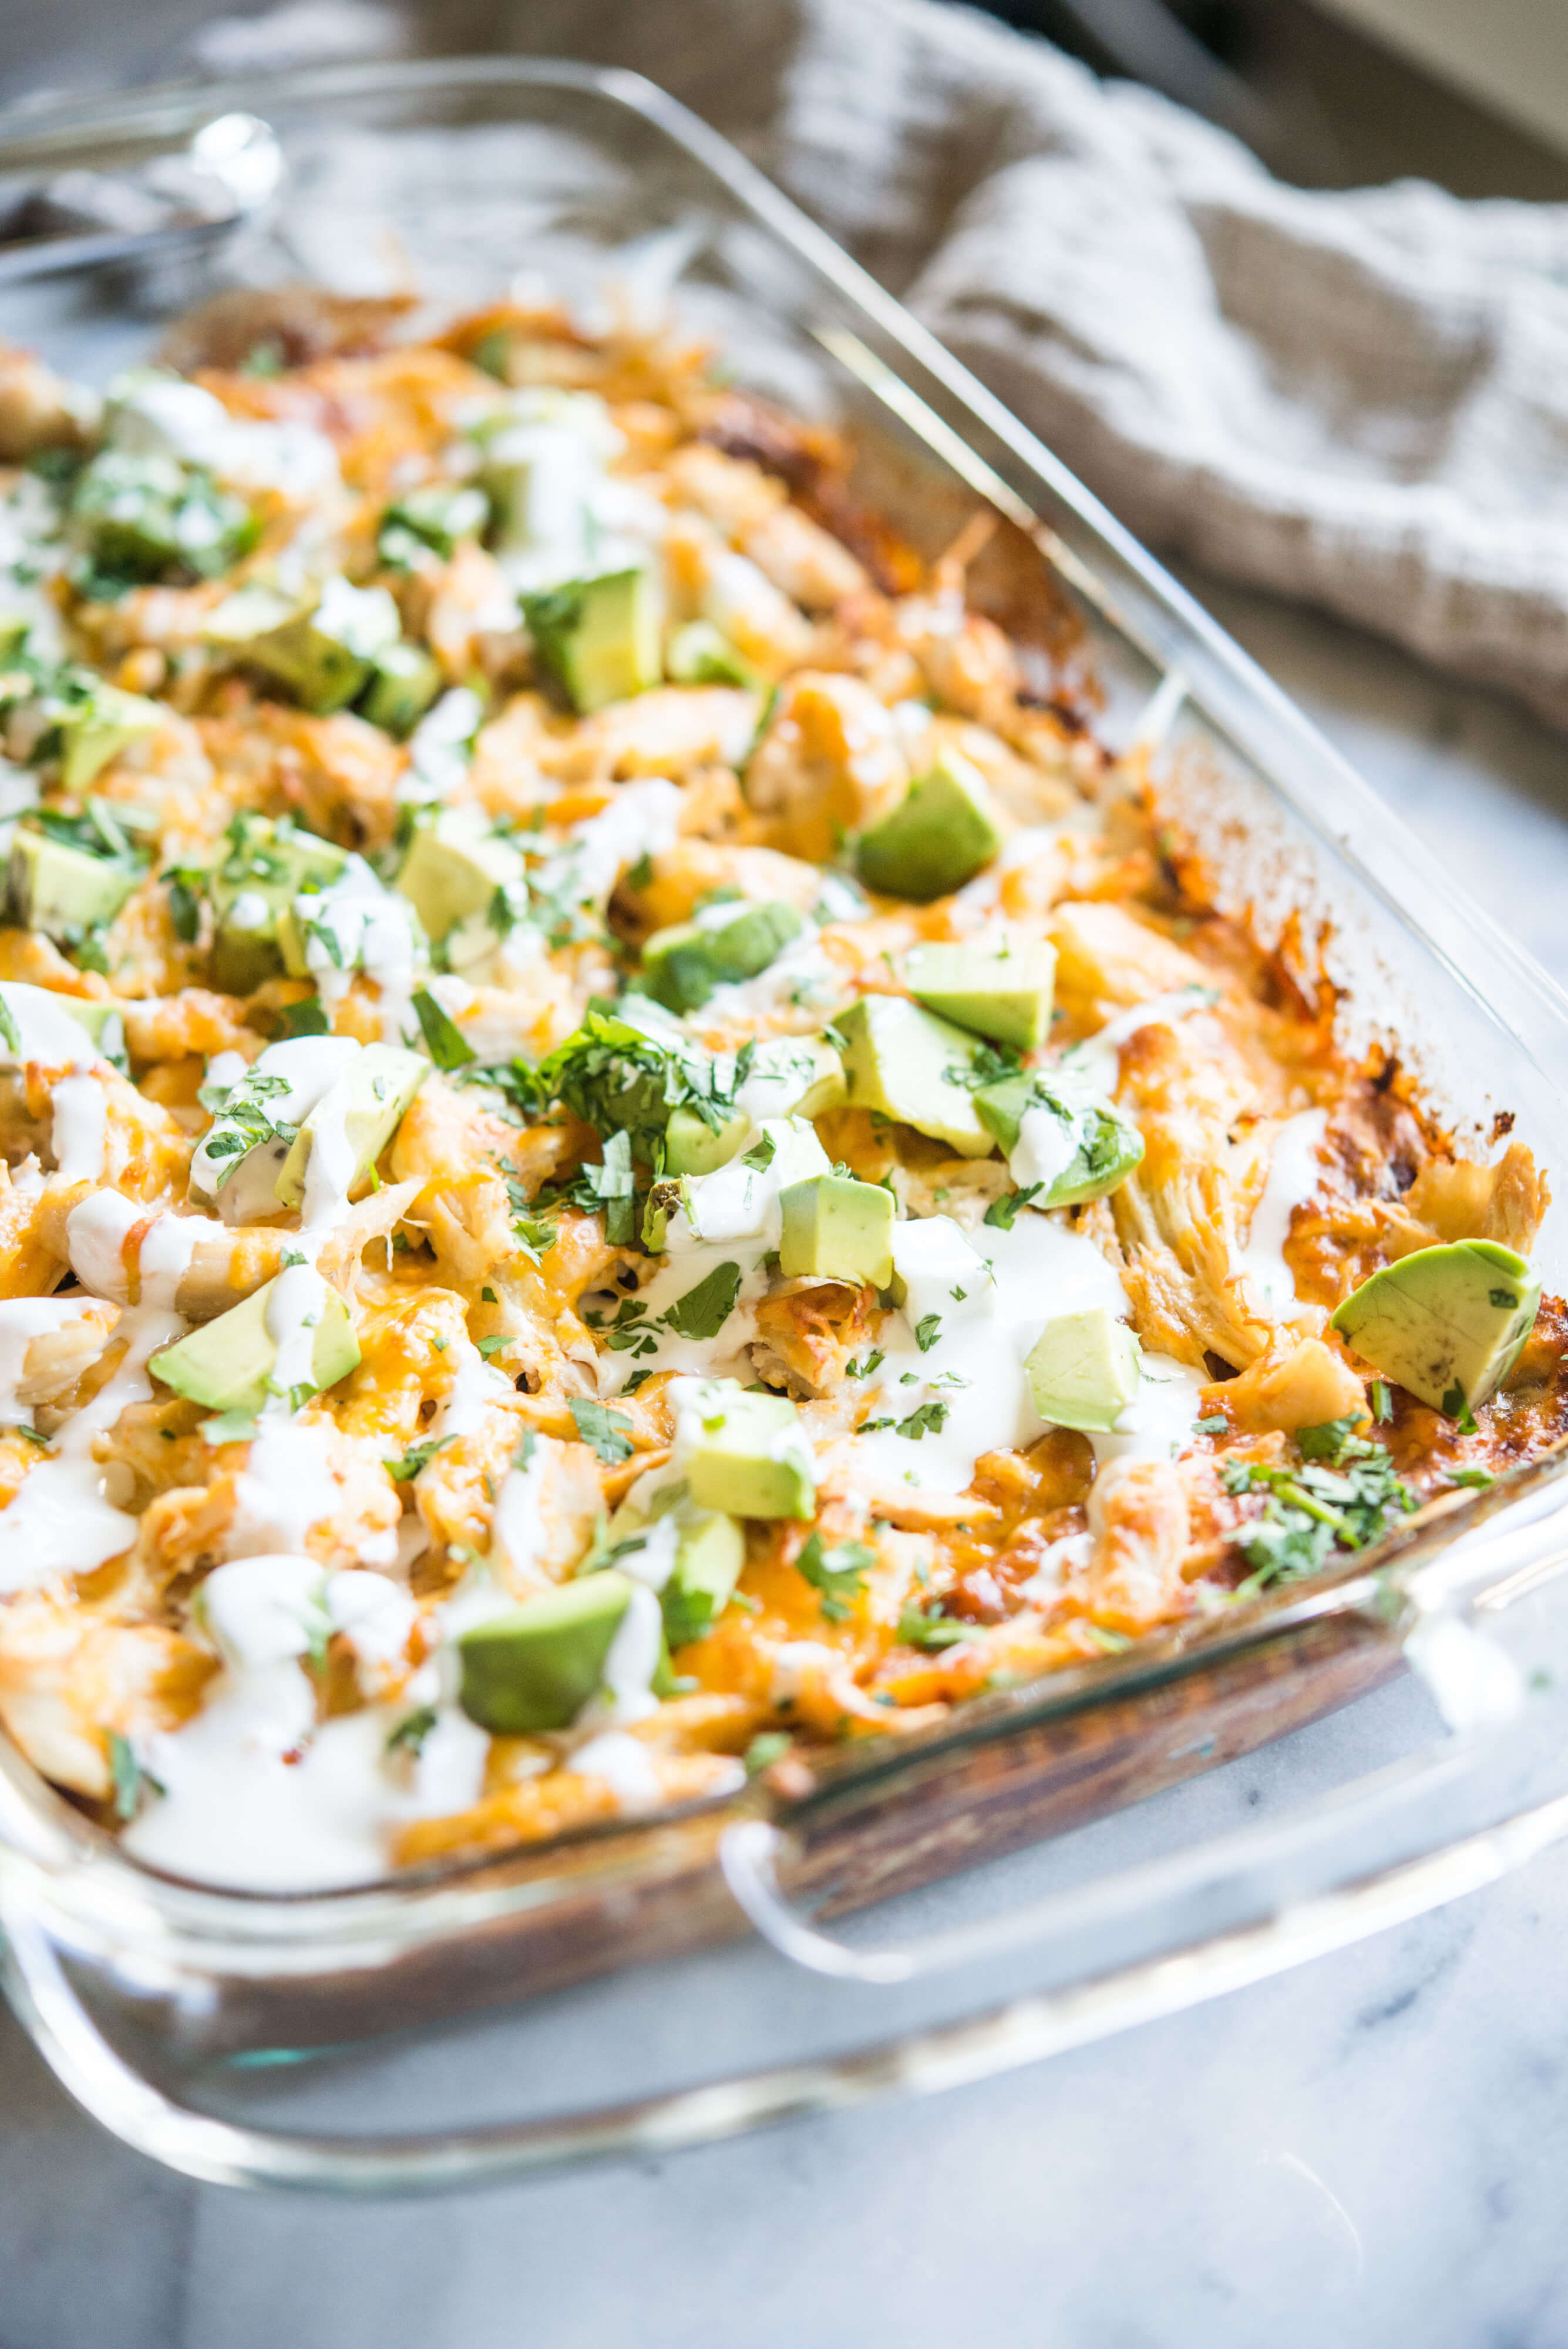 Chicken enchilada casserole with sauce and chopped avocado on top